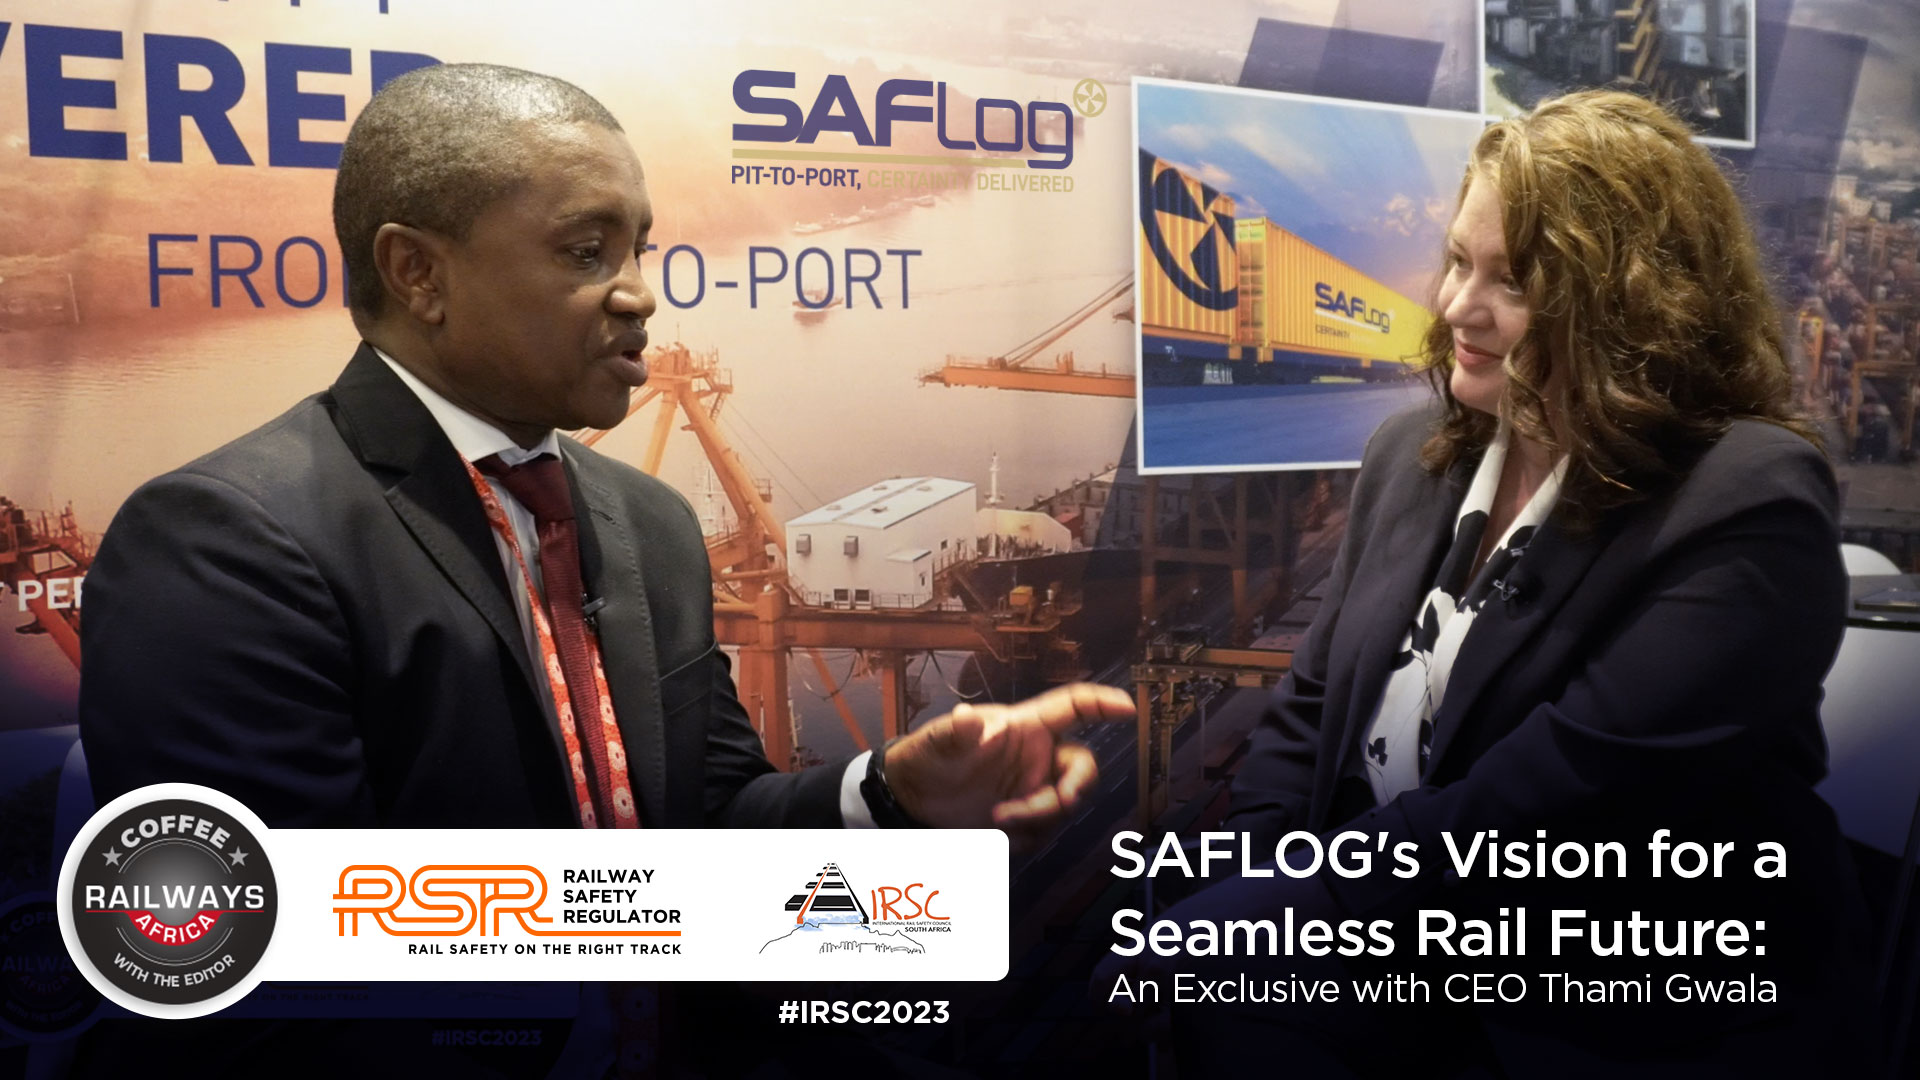 SAFLOG's Vision for a Seamless Rail Future: An Exclusive with CEO Thami Gwala